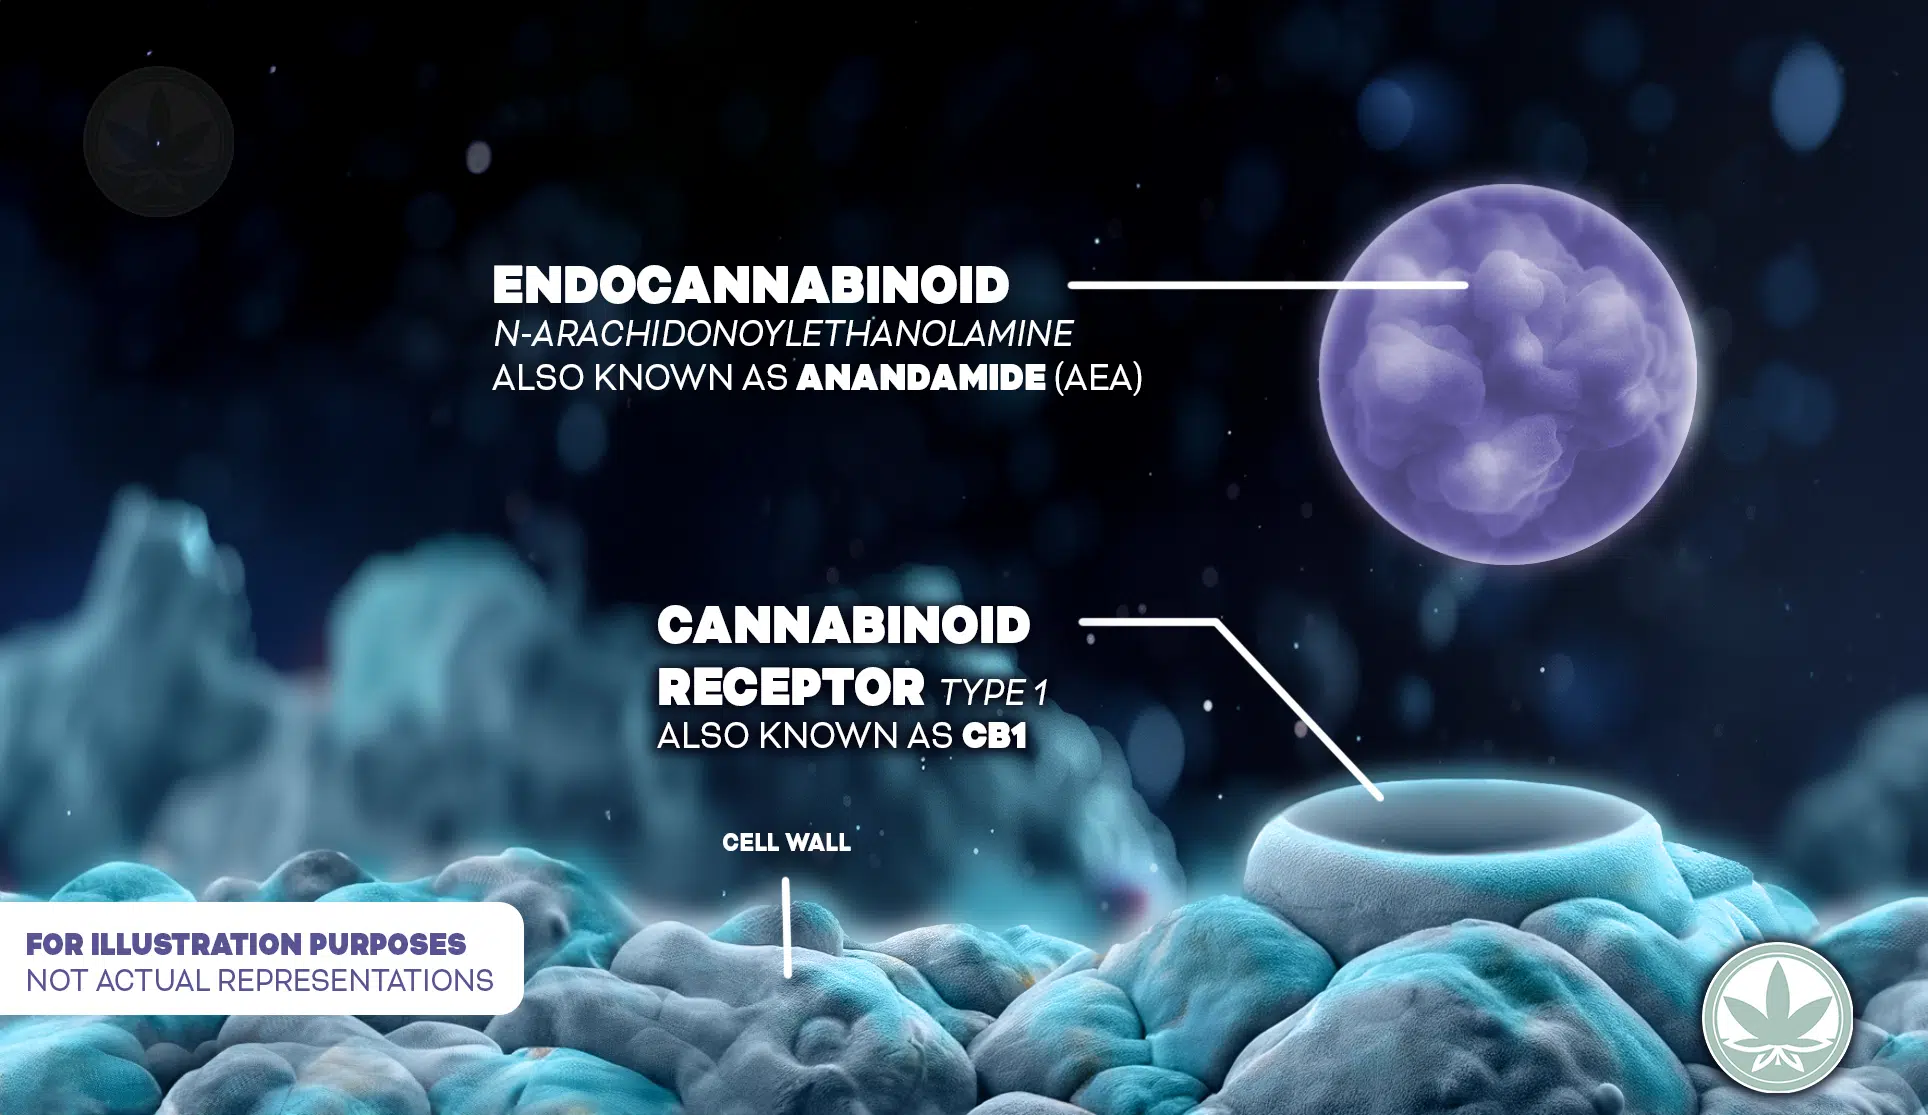 An illustrative digital rendering portrays the interaction between an endocannabinoid and a receptor. In the foreground, a detailed cellular structure with a blue and white cell wall is depicted. A labeled arrow points to the wall indicating "cannabinoid receptor type 1, also known as cb1. " above this, a spherical entity with a lavender glow represents the endocannabinoid n-arachidonoylethanolamine, labeled "endocannabinoid, also known as anandamide (aea). " the deep space-like background with scattered light particles adds a cosmic feel to the image, emphasizing the significance of this microscopic interaction. A disclaimer at the bottom notes, "for illustration purposes not actual representations," reminding viewers of the artistic interpretation of the scientific concept. A cannabis leaf icon is subtly included, associating the image with cannabis research and science.